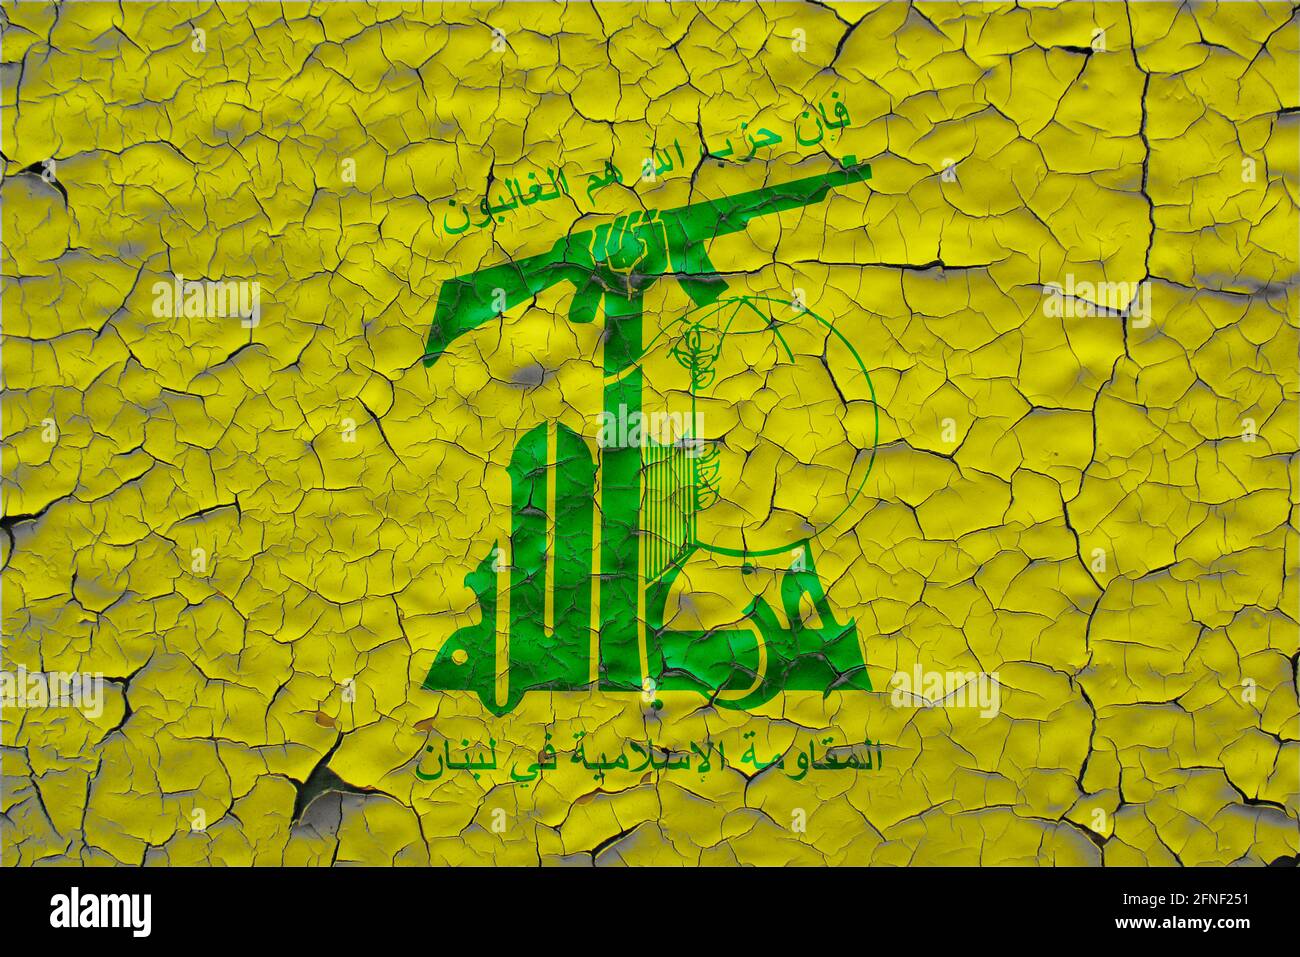 Hezbollah flags painted over cracked concrete wall Stock Photo